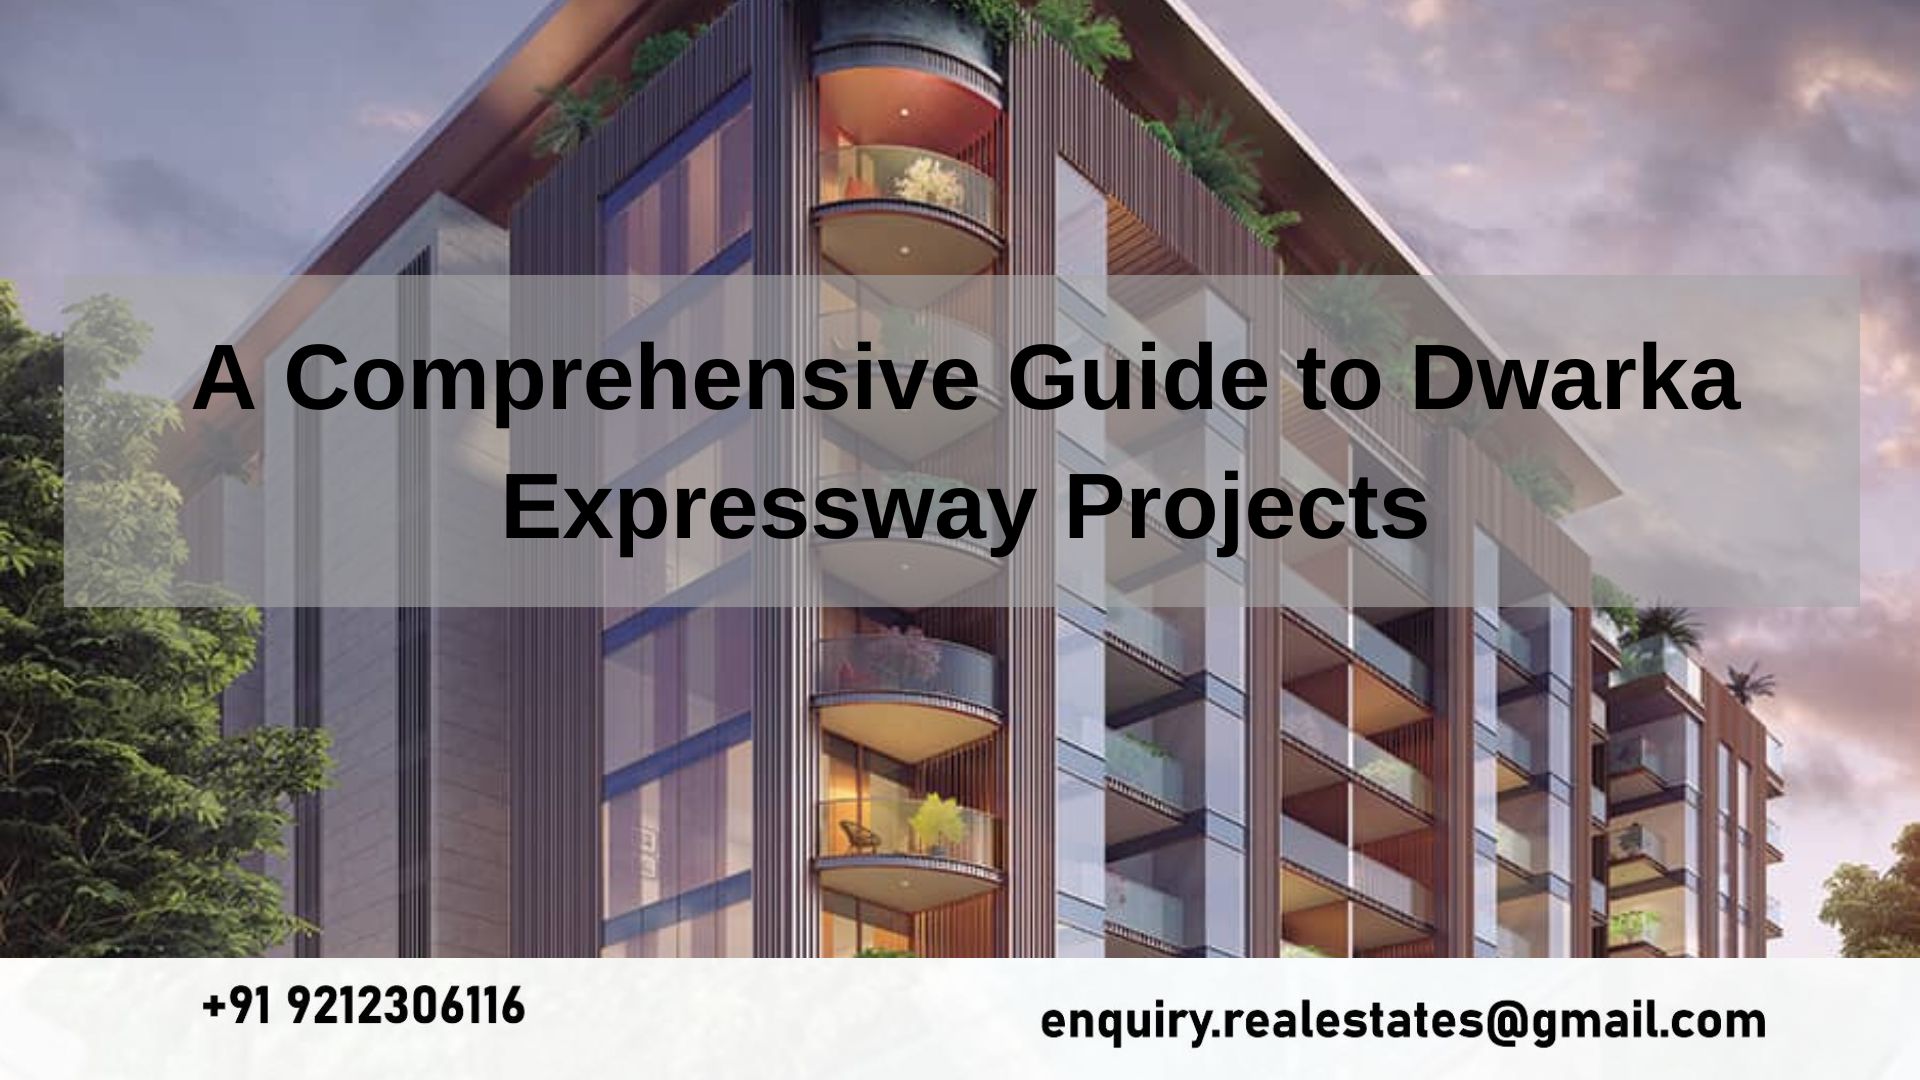 A Comprehensive Guide to Dwarka Expressway Projects